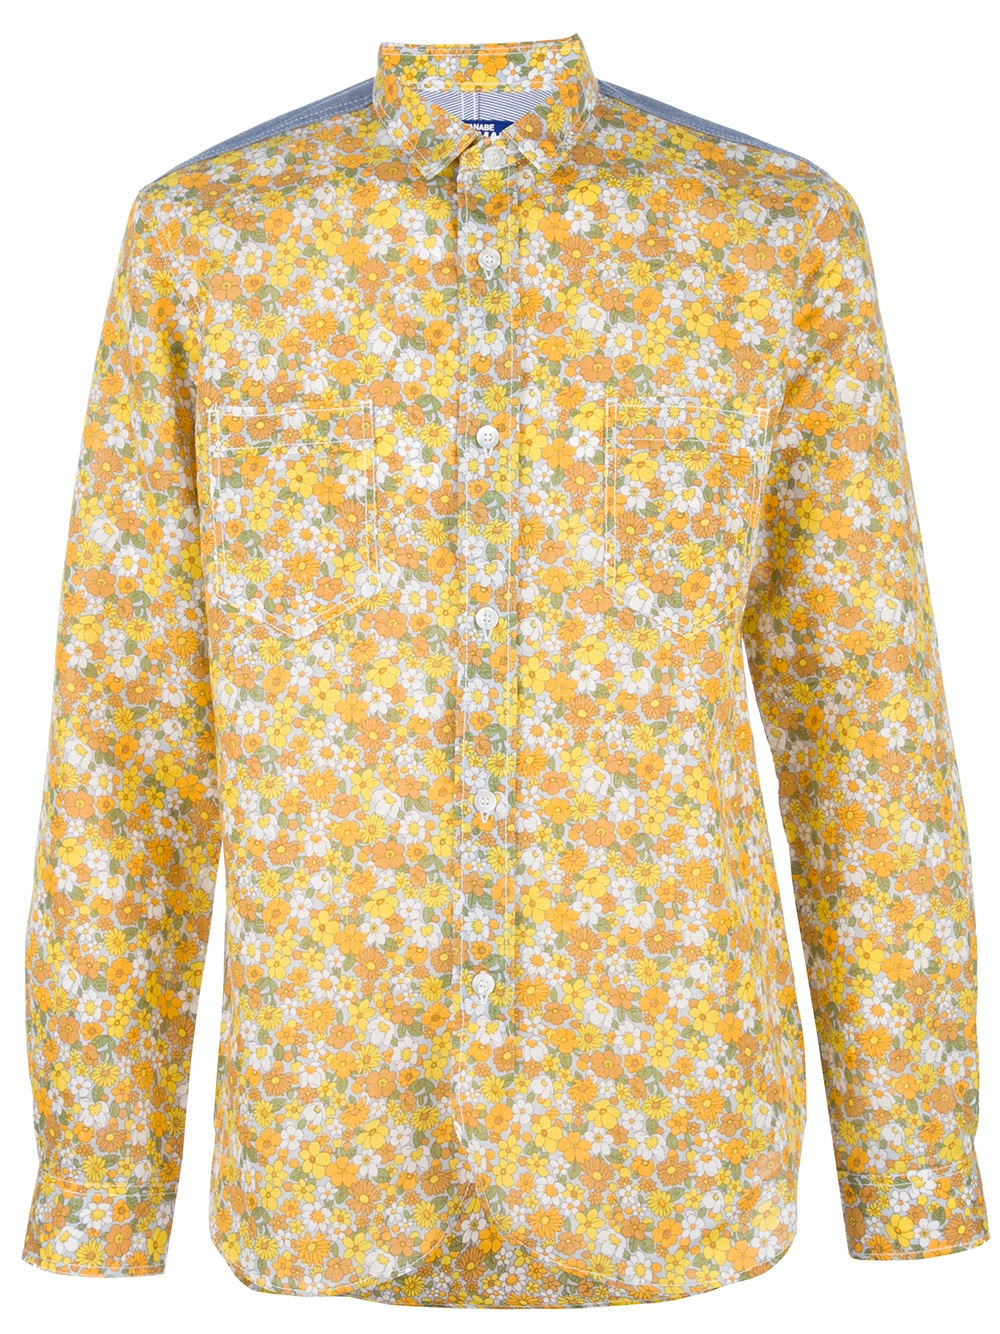 Lyst - Junya Watanabe Floral Shirt in Yellow for Men